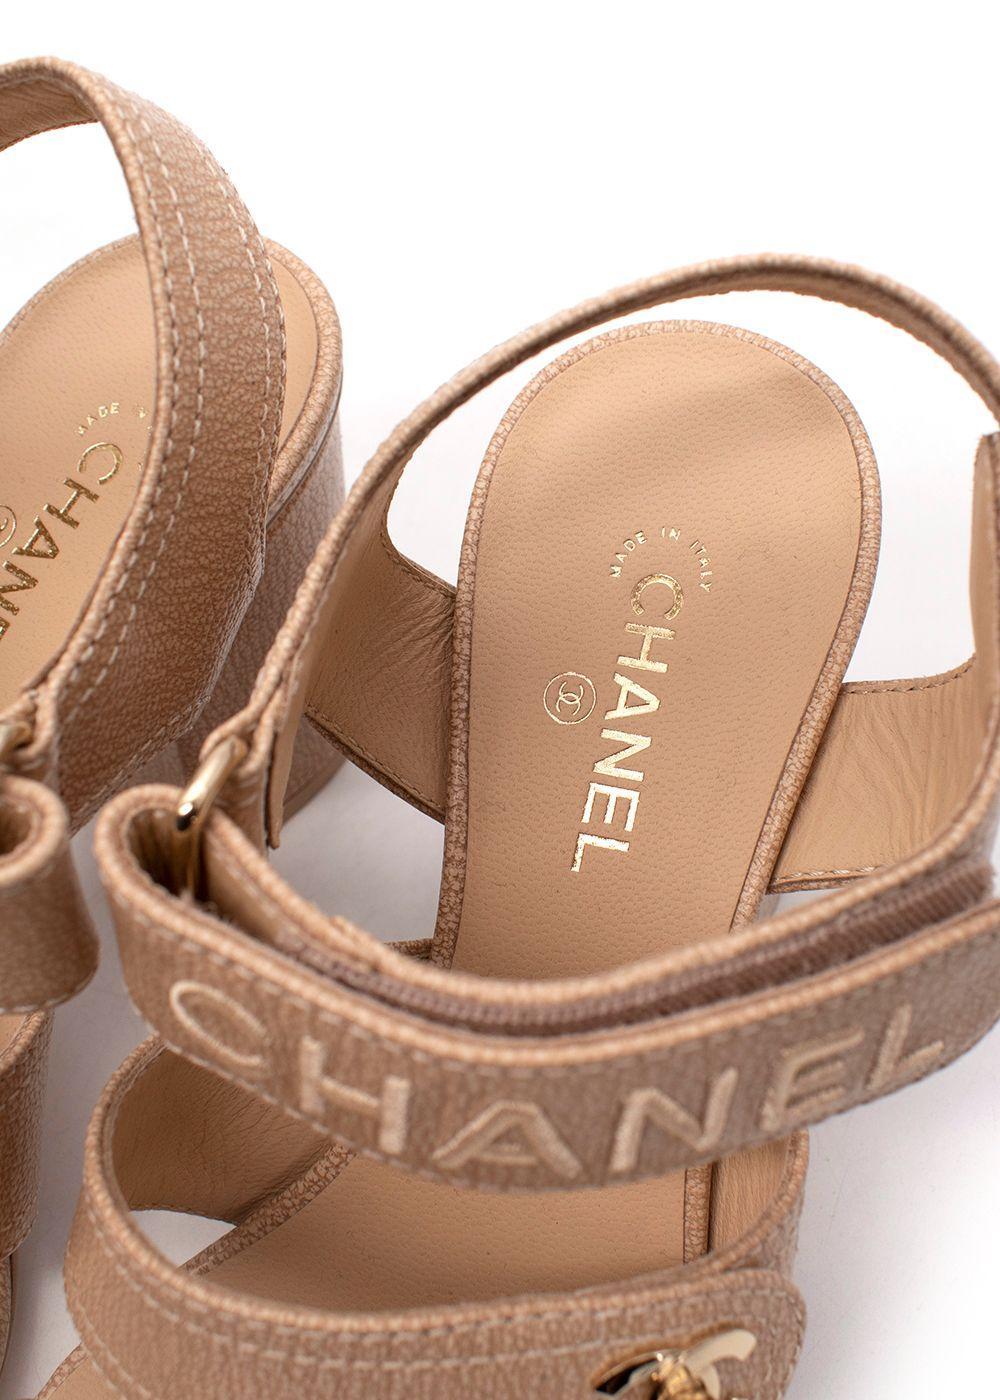 chanel nude sandals